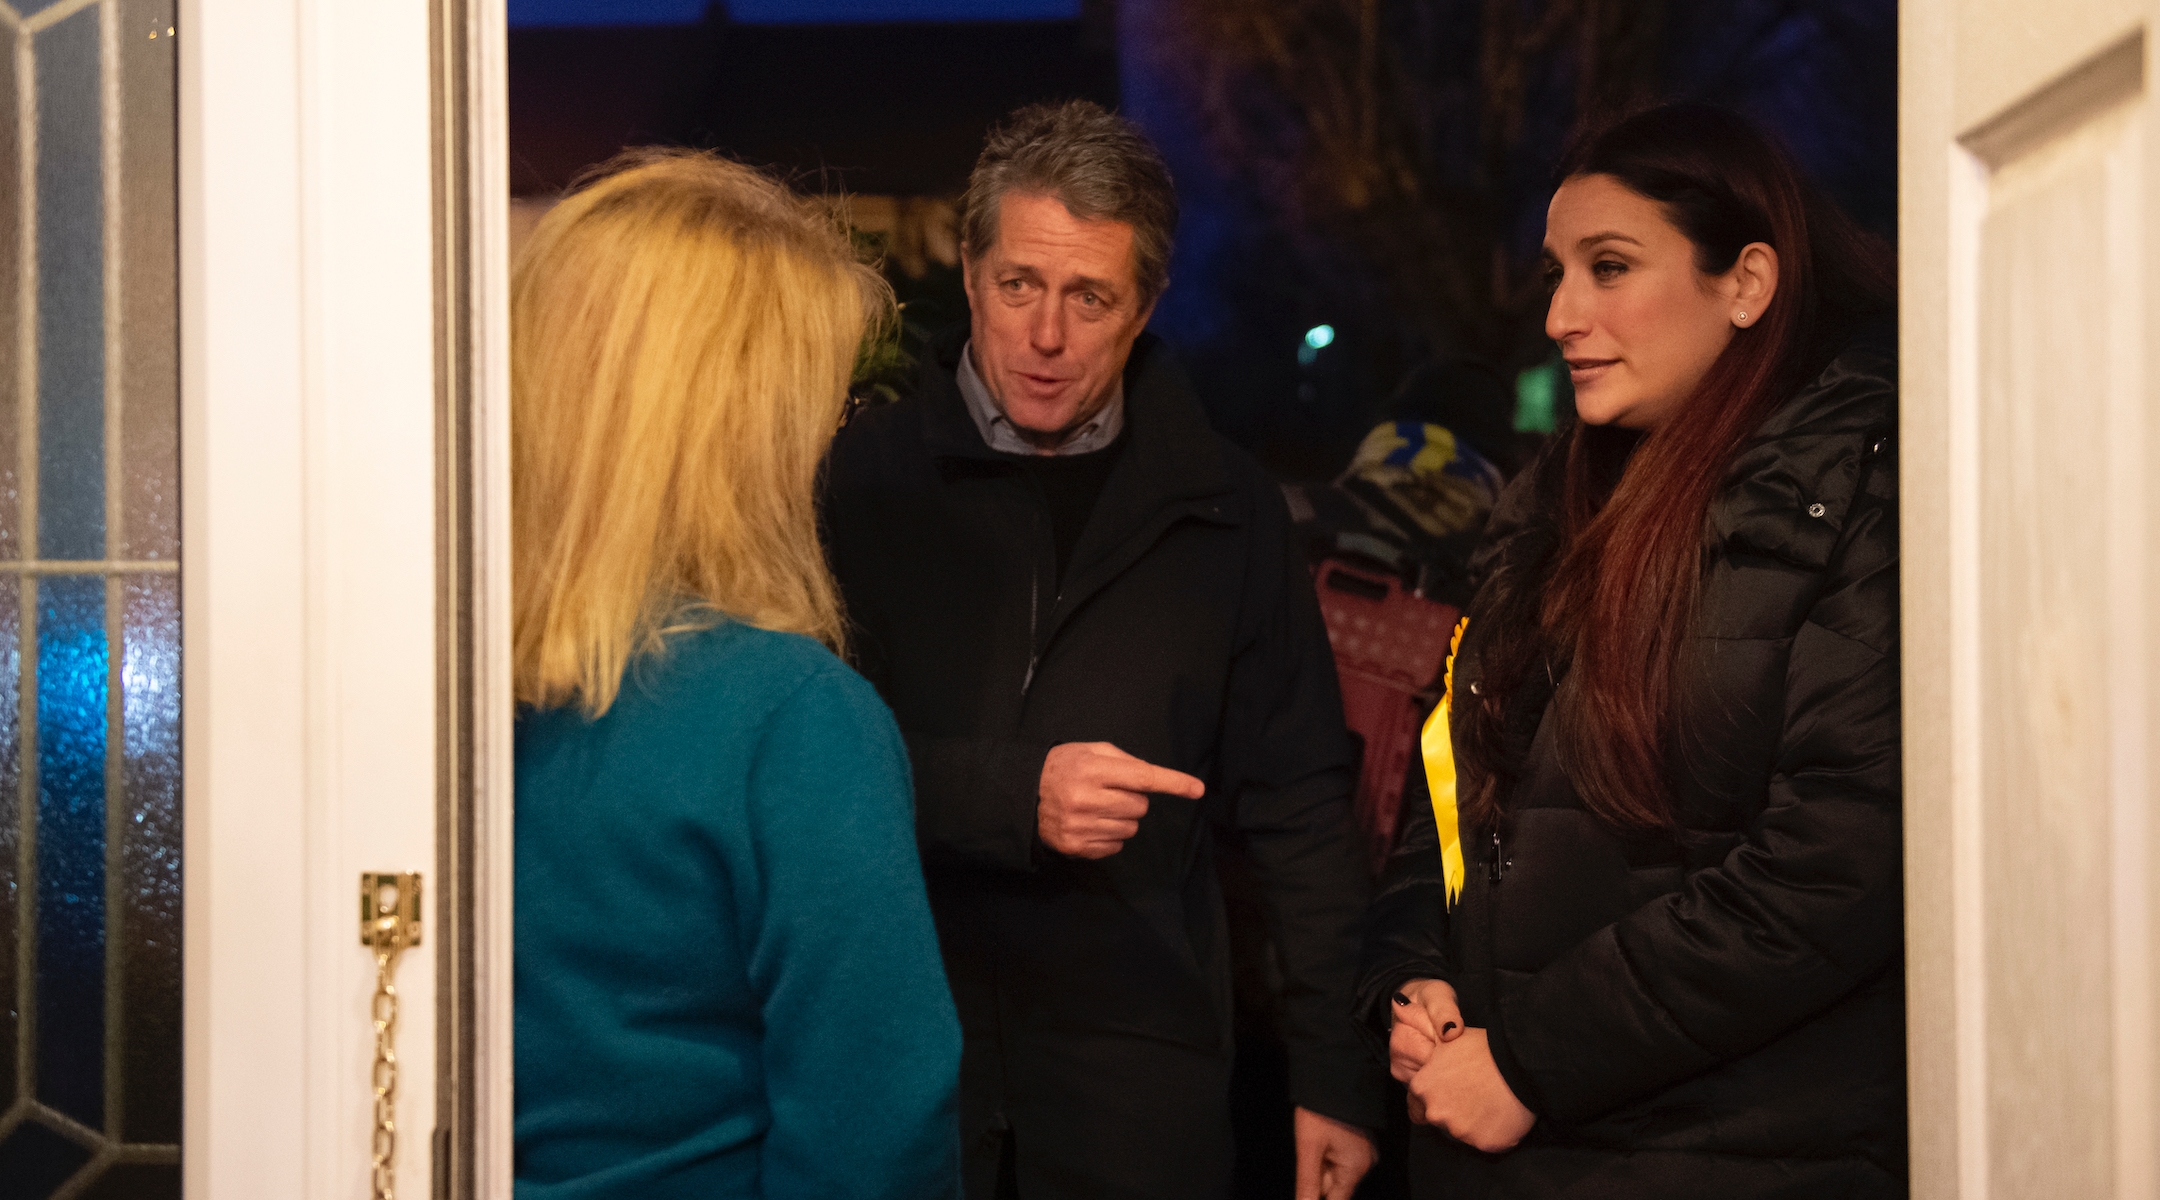 Hugh Grant, left, canvassing in Finchley, London, with Liberal Democratic parliament candidate Luciana Berger, right, Dec. 1, 2019. (David Mirzoeff/PA Images via Getty Images)